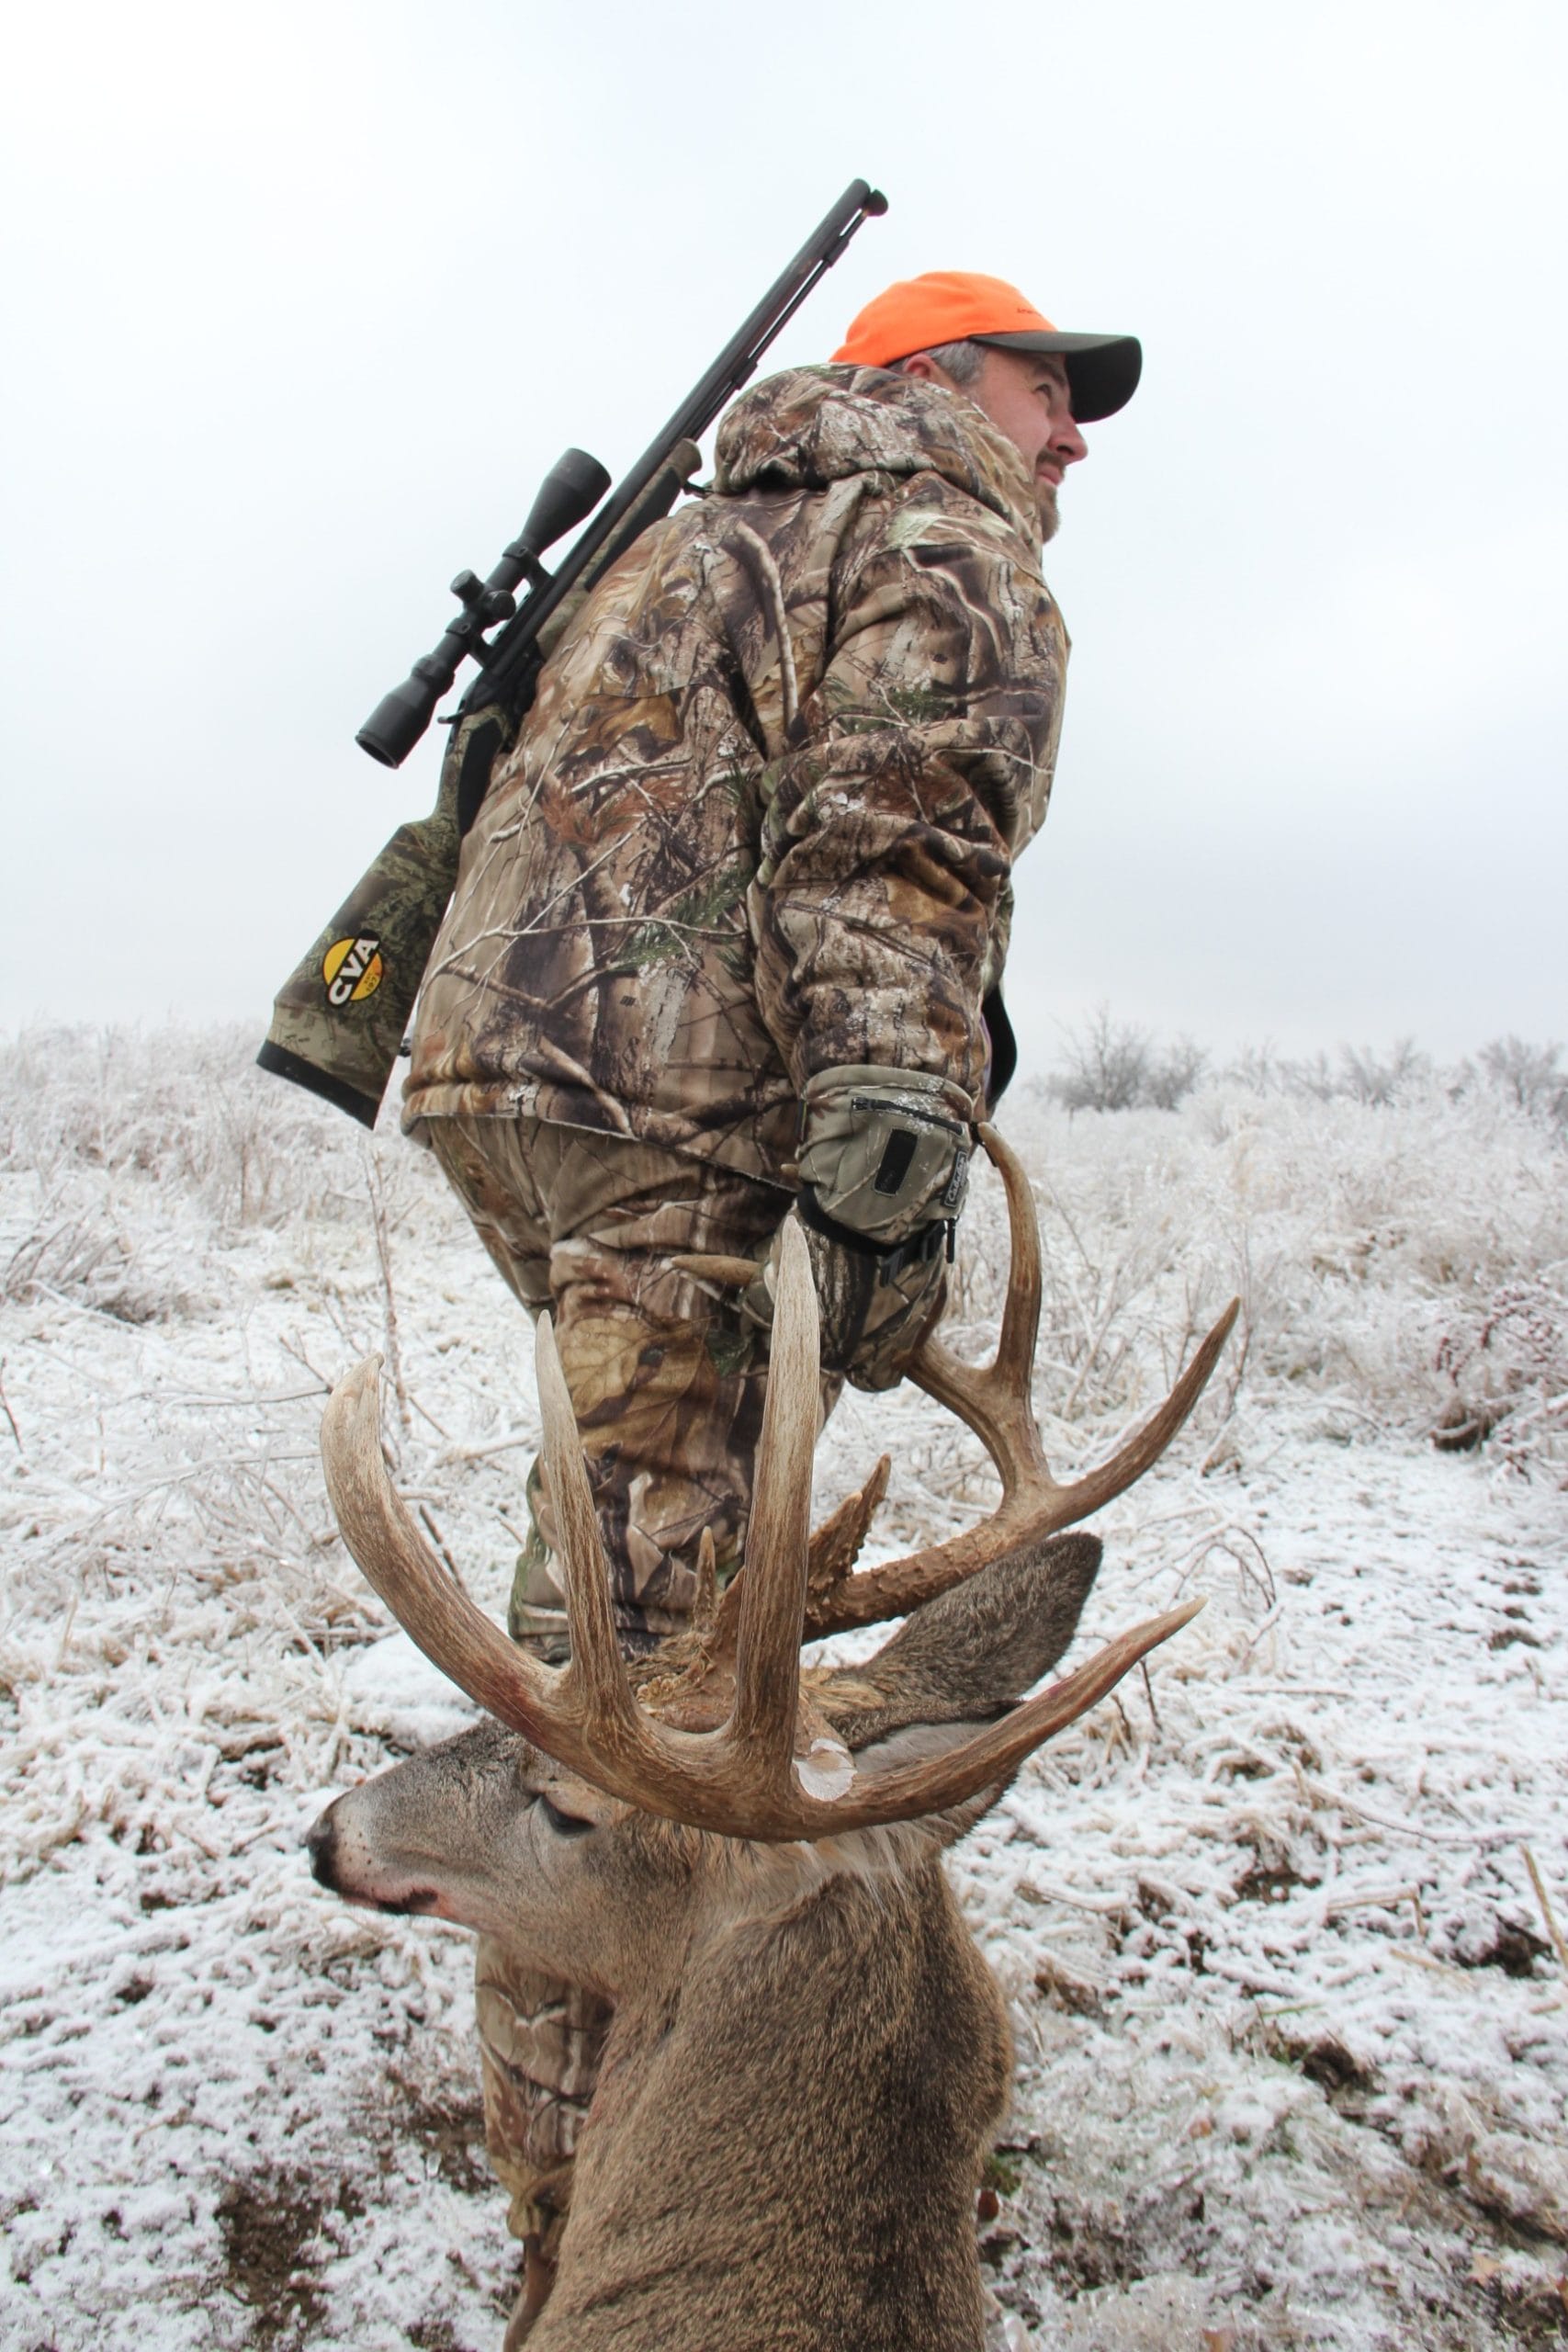 Now is the perfect time for intensive scouting of a big buck's bedding areas and trails, areas where you would want to tread lightly during hunting season. 